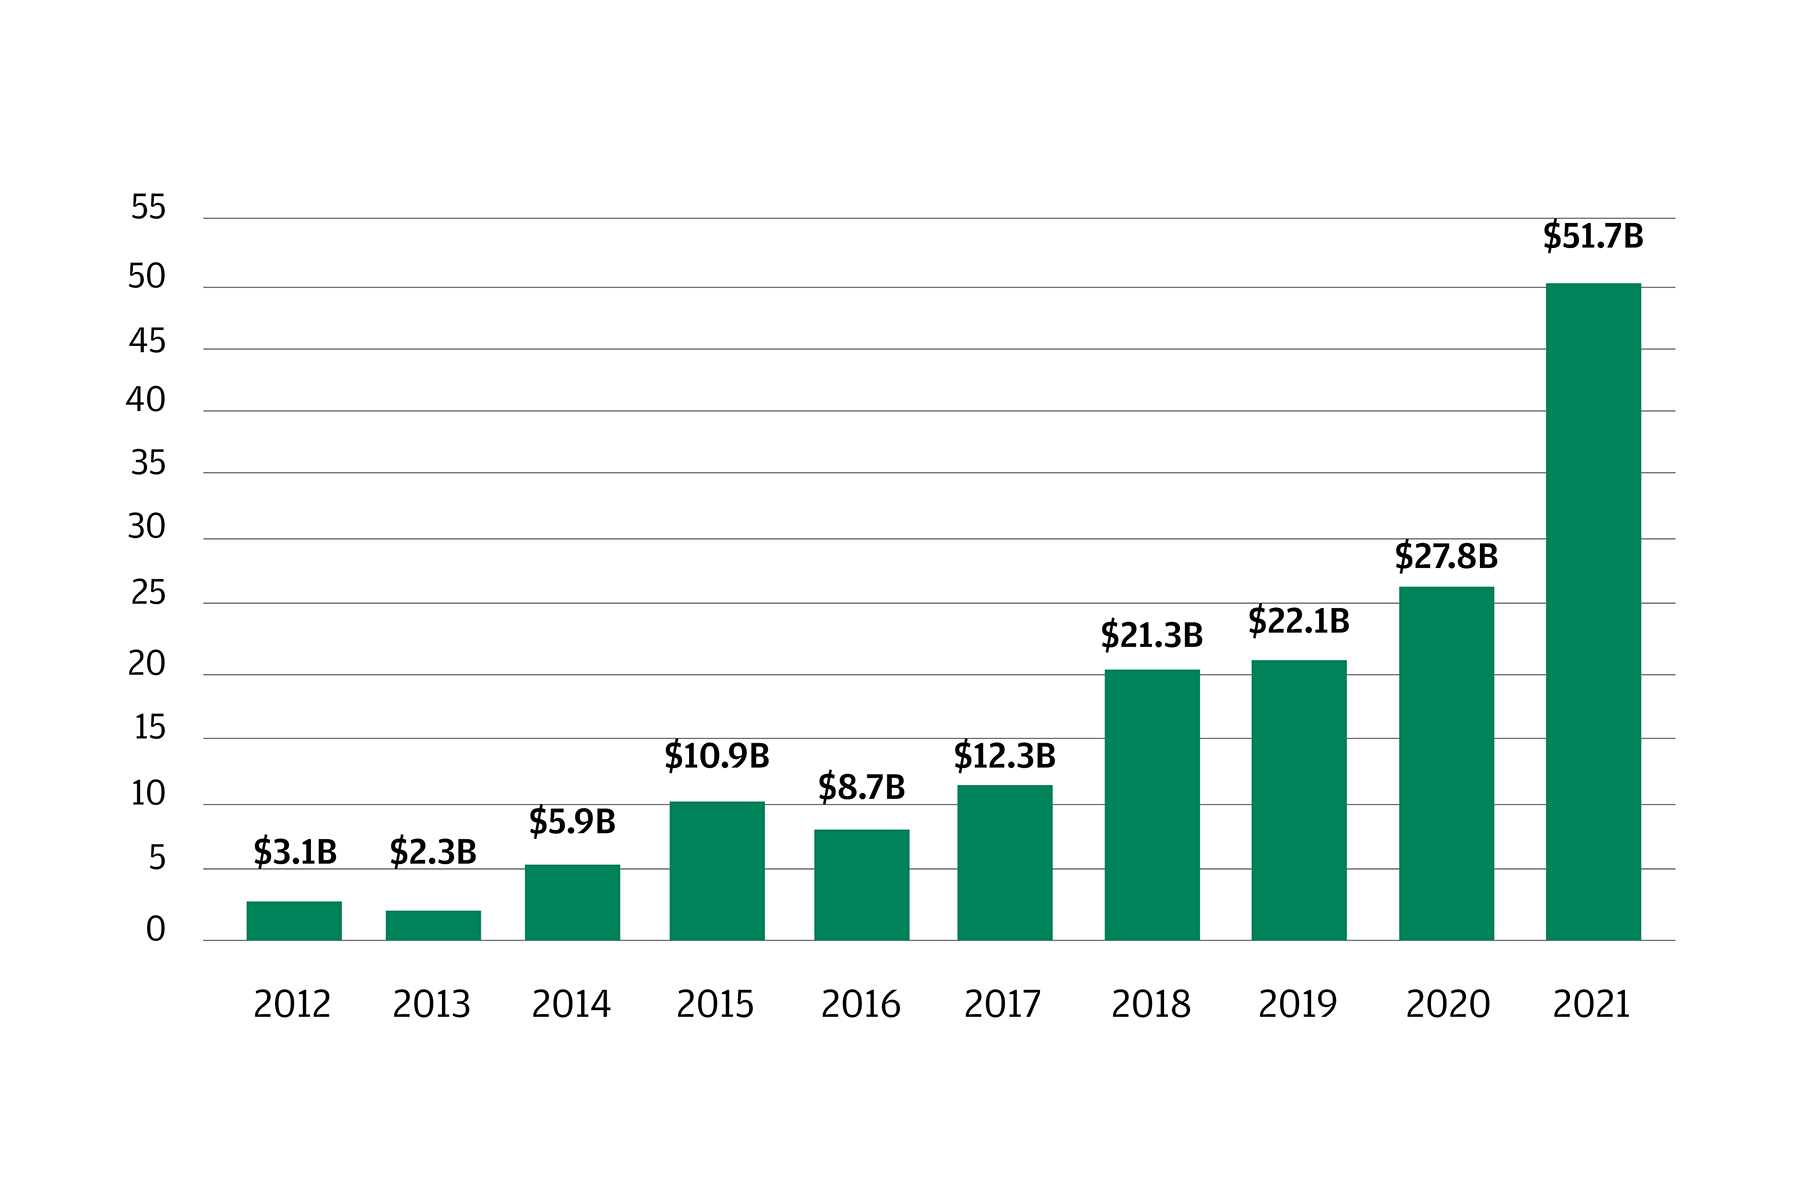 This graph describes the upstream and downstream annual AgriFoodTech financings from 2012 ‚Äì 2021.